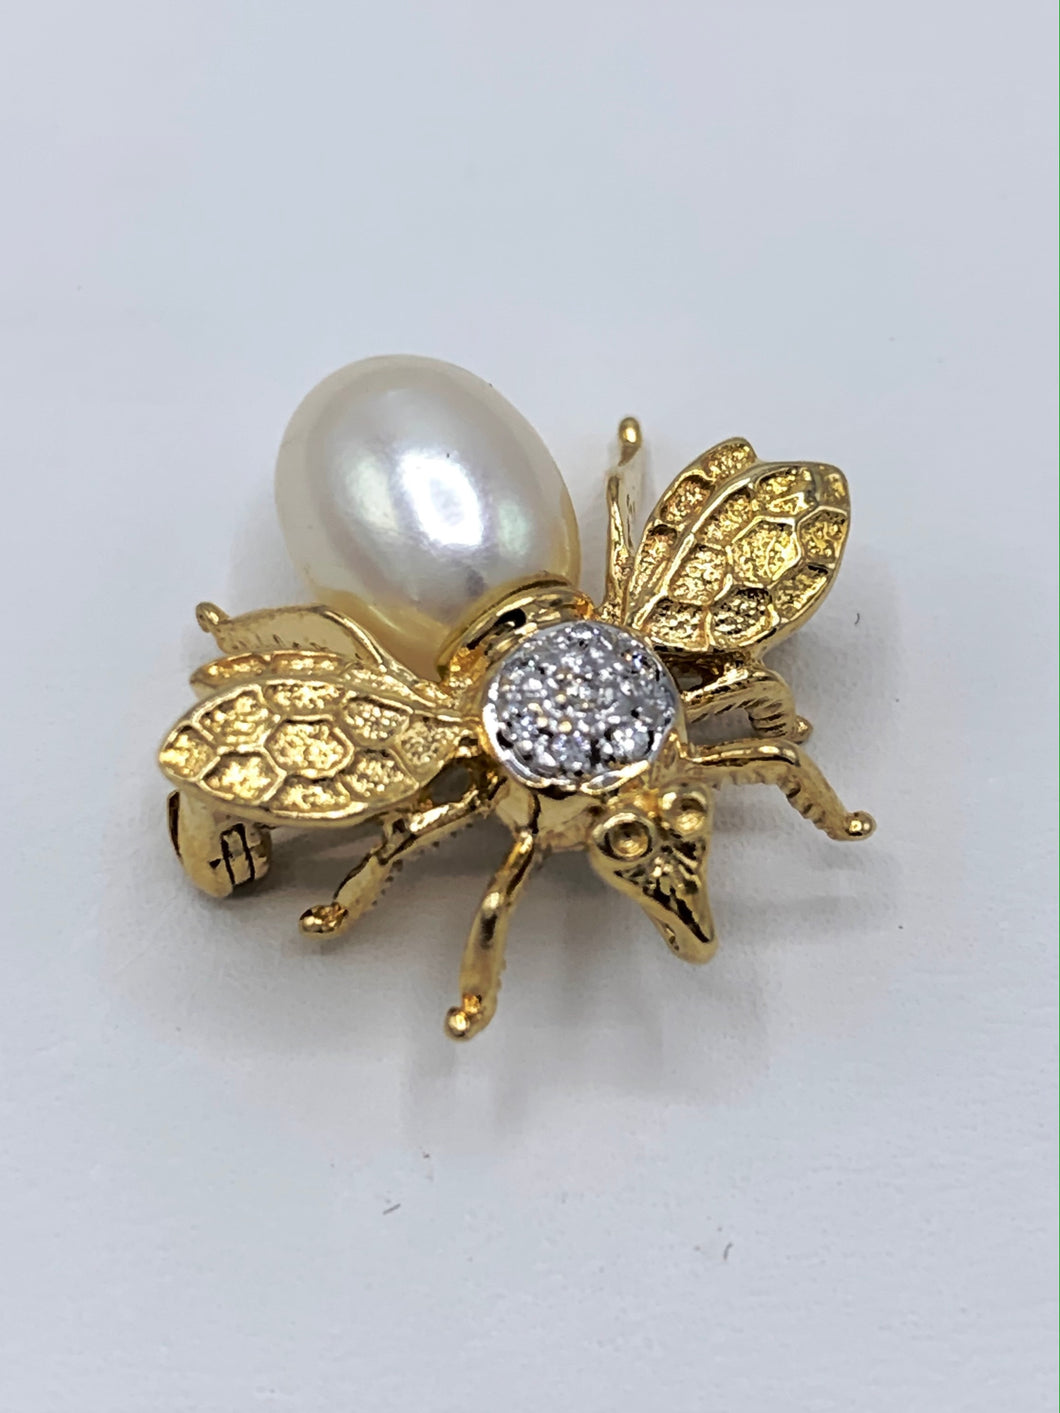 14K Yellow Gold Diamond Wasp Pin with Freshwater Pearl